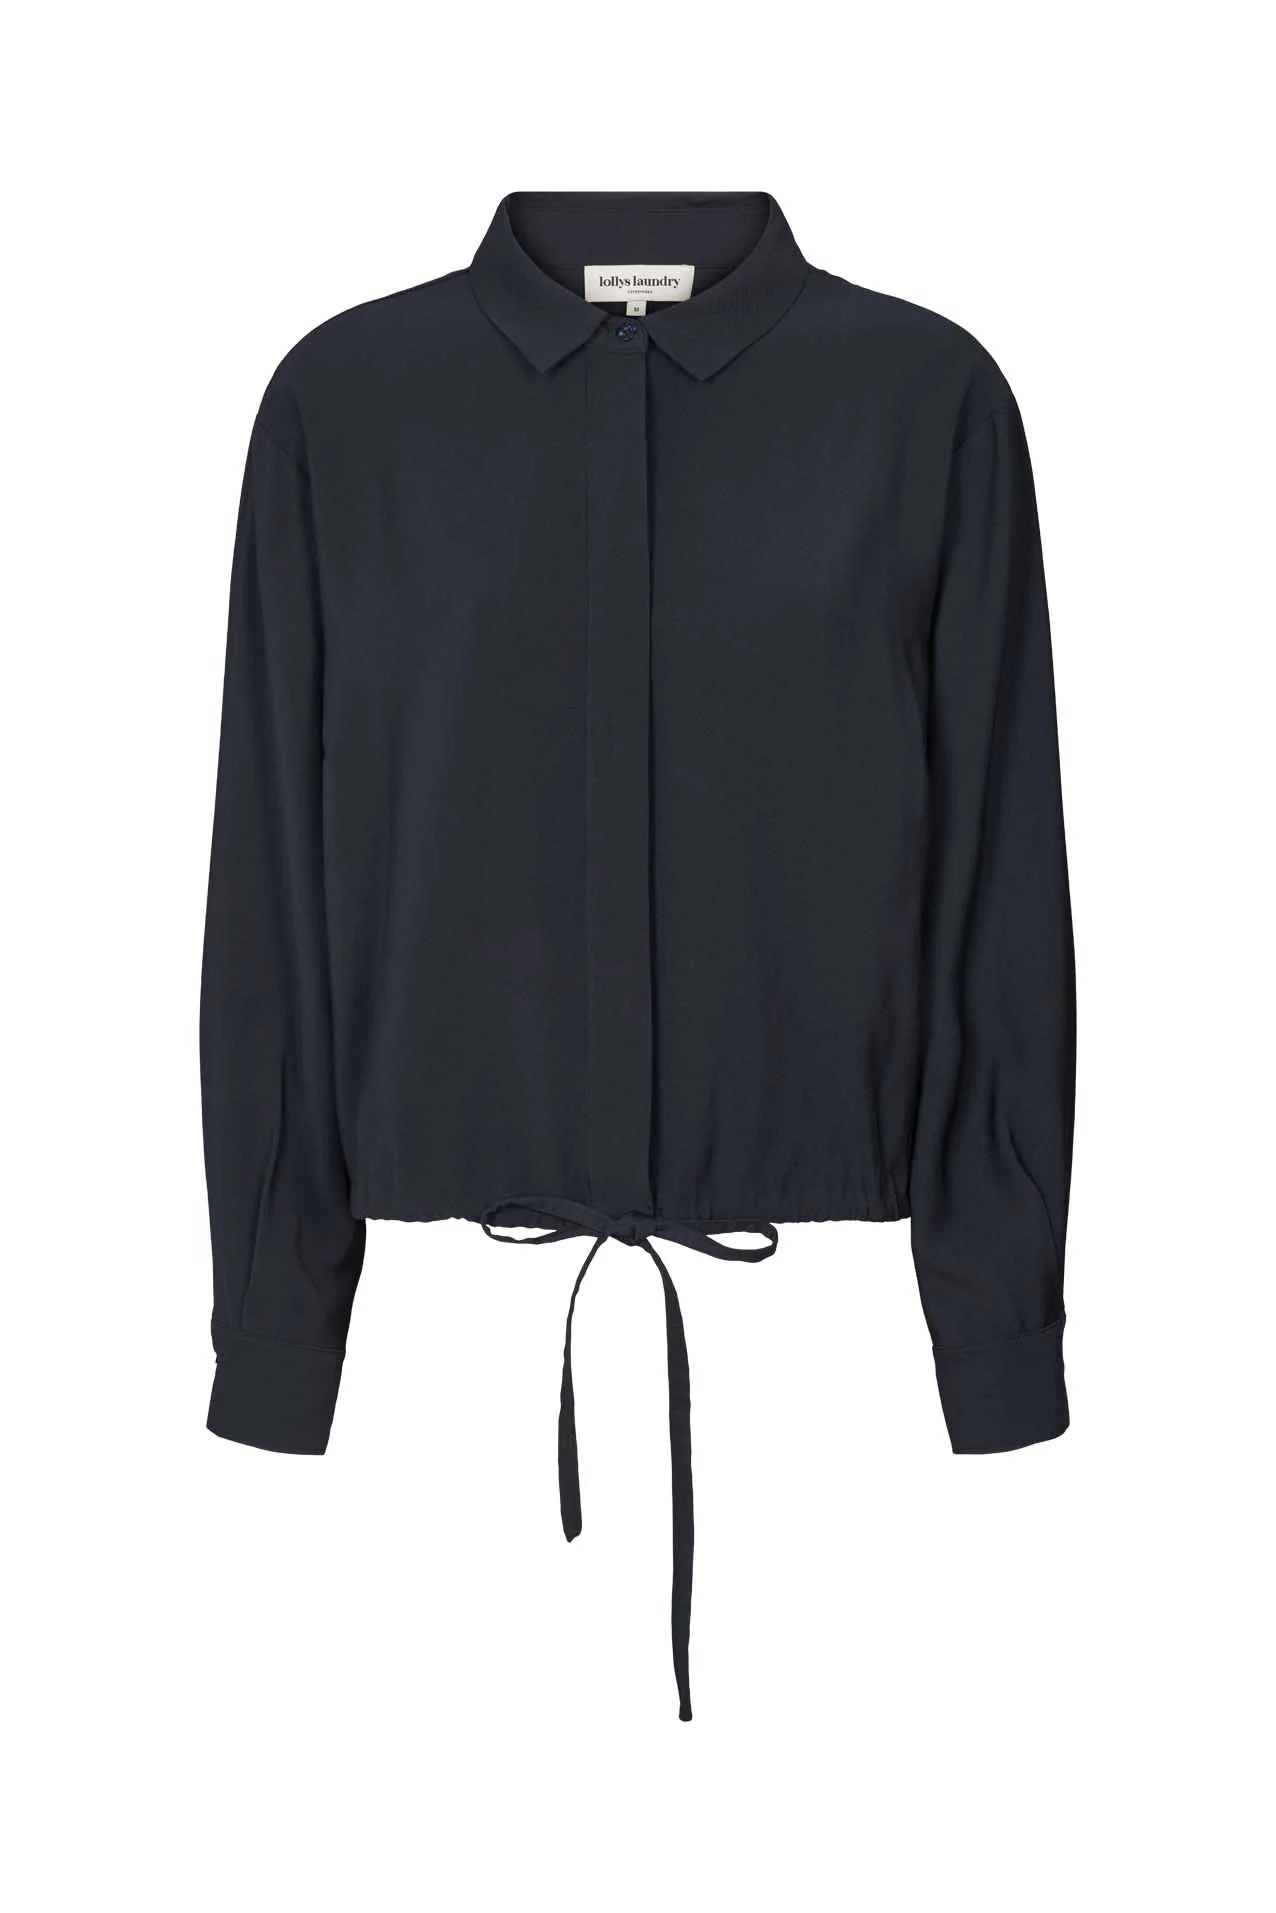 Load image into Gallery viewer, Lollys Laundry Tobago Shirt - Dark Navy
